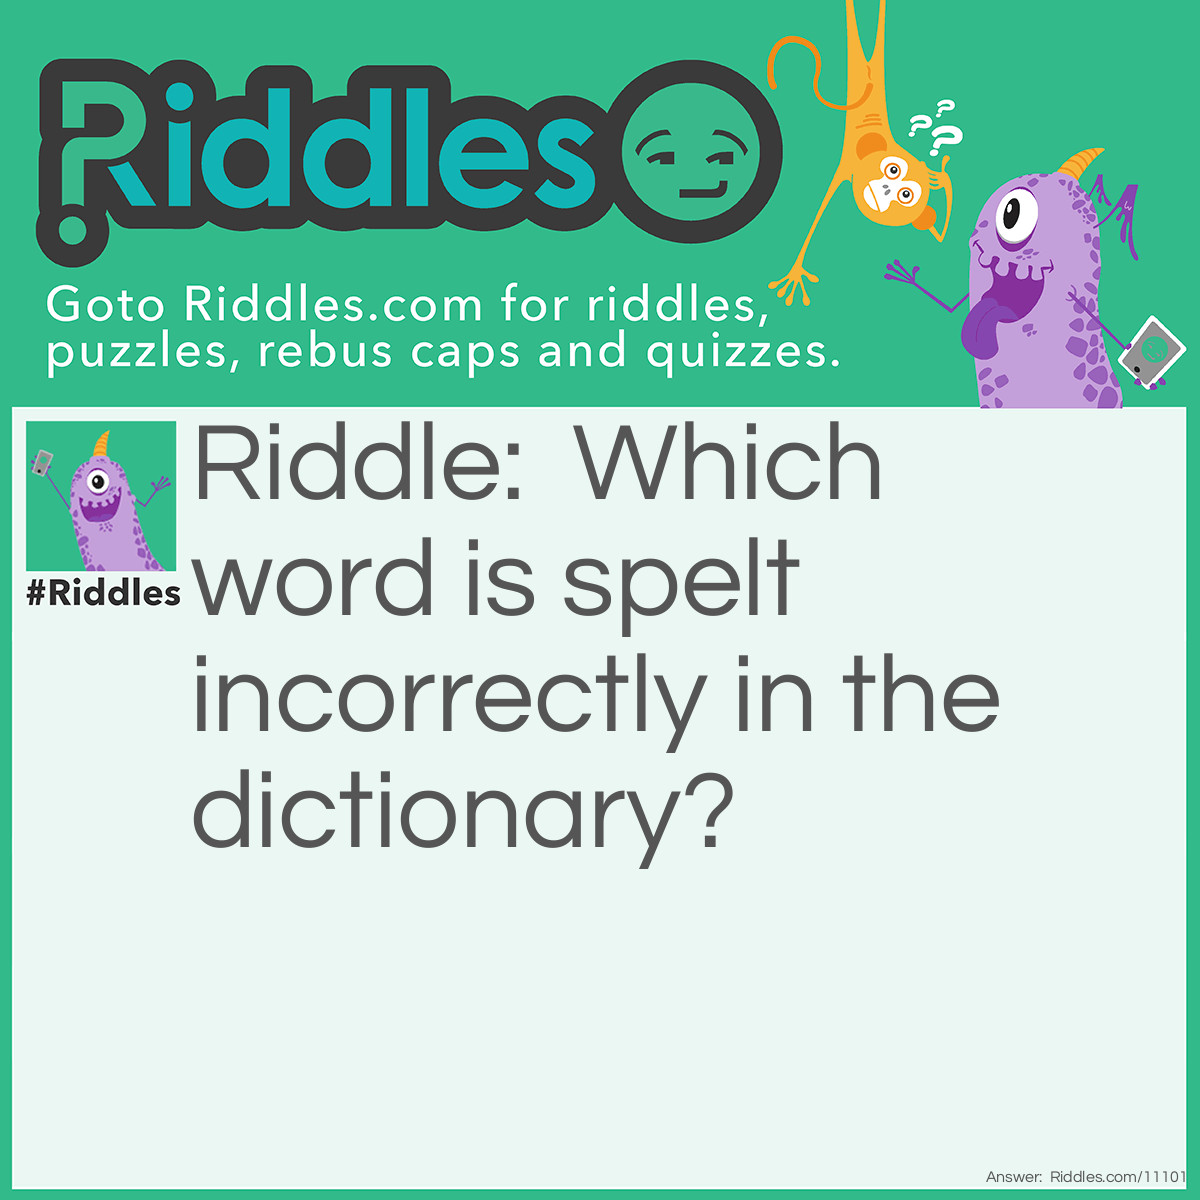 Riddle: Which word is spelt incorrectly in the dictionary? Answer: Incorrectly